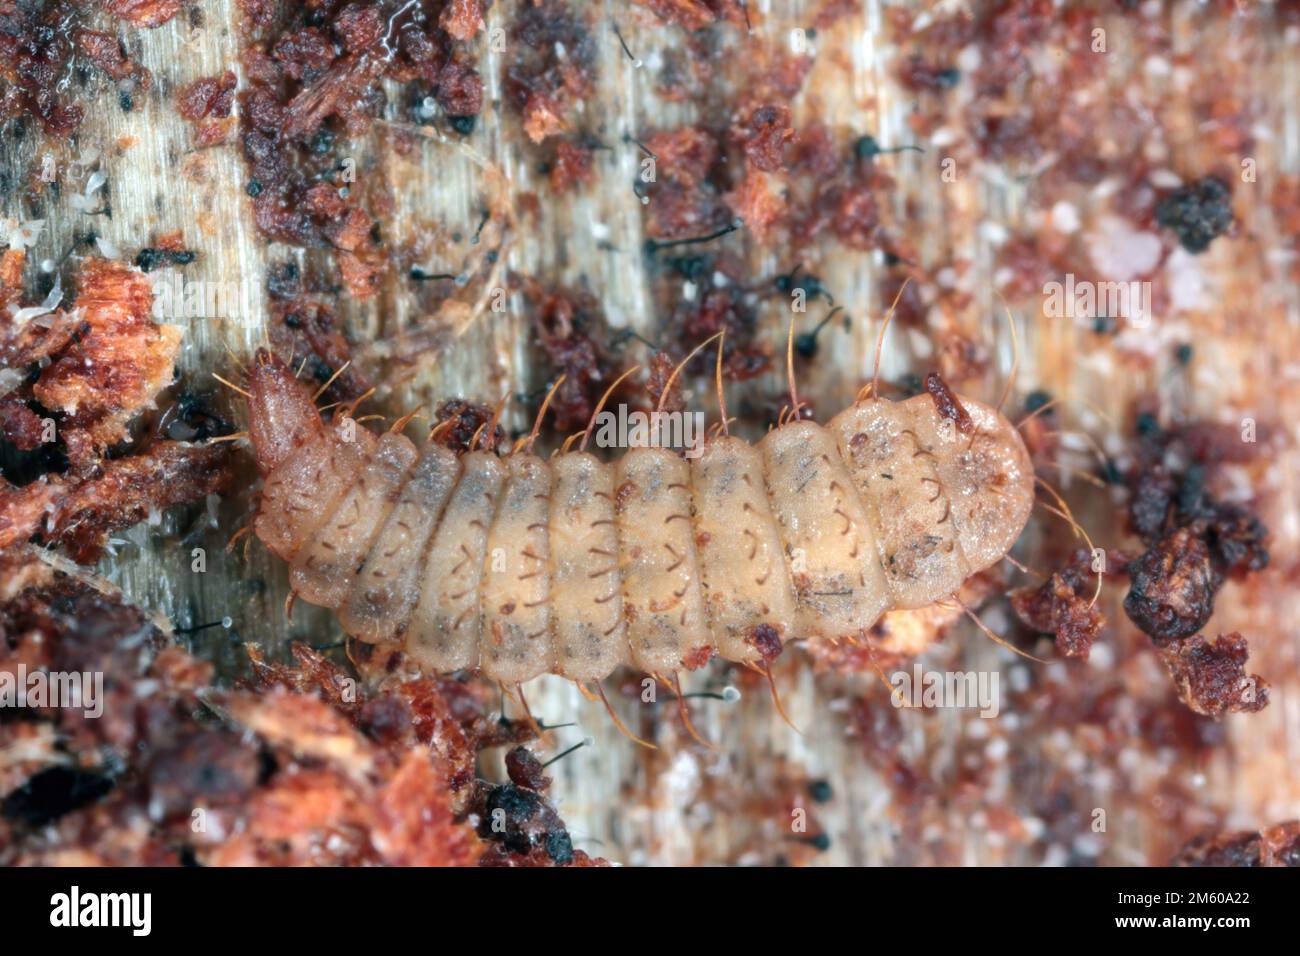 Soldier fly larva on rotten wood (Stratiomyidae) Stock Photo